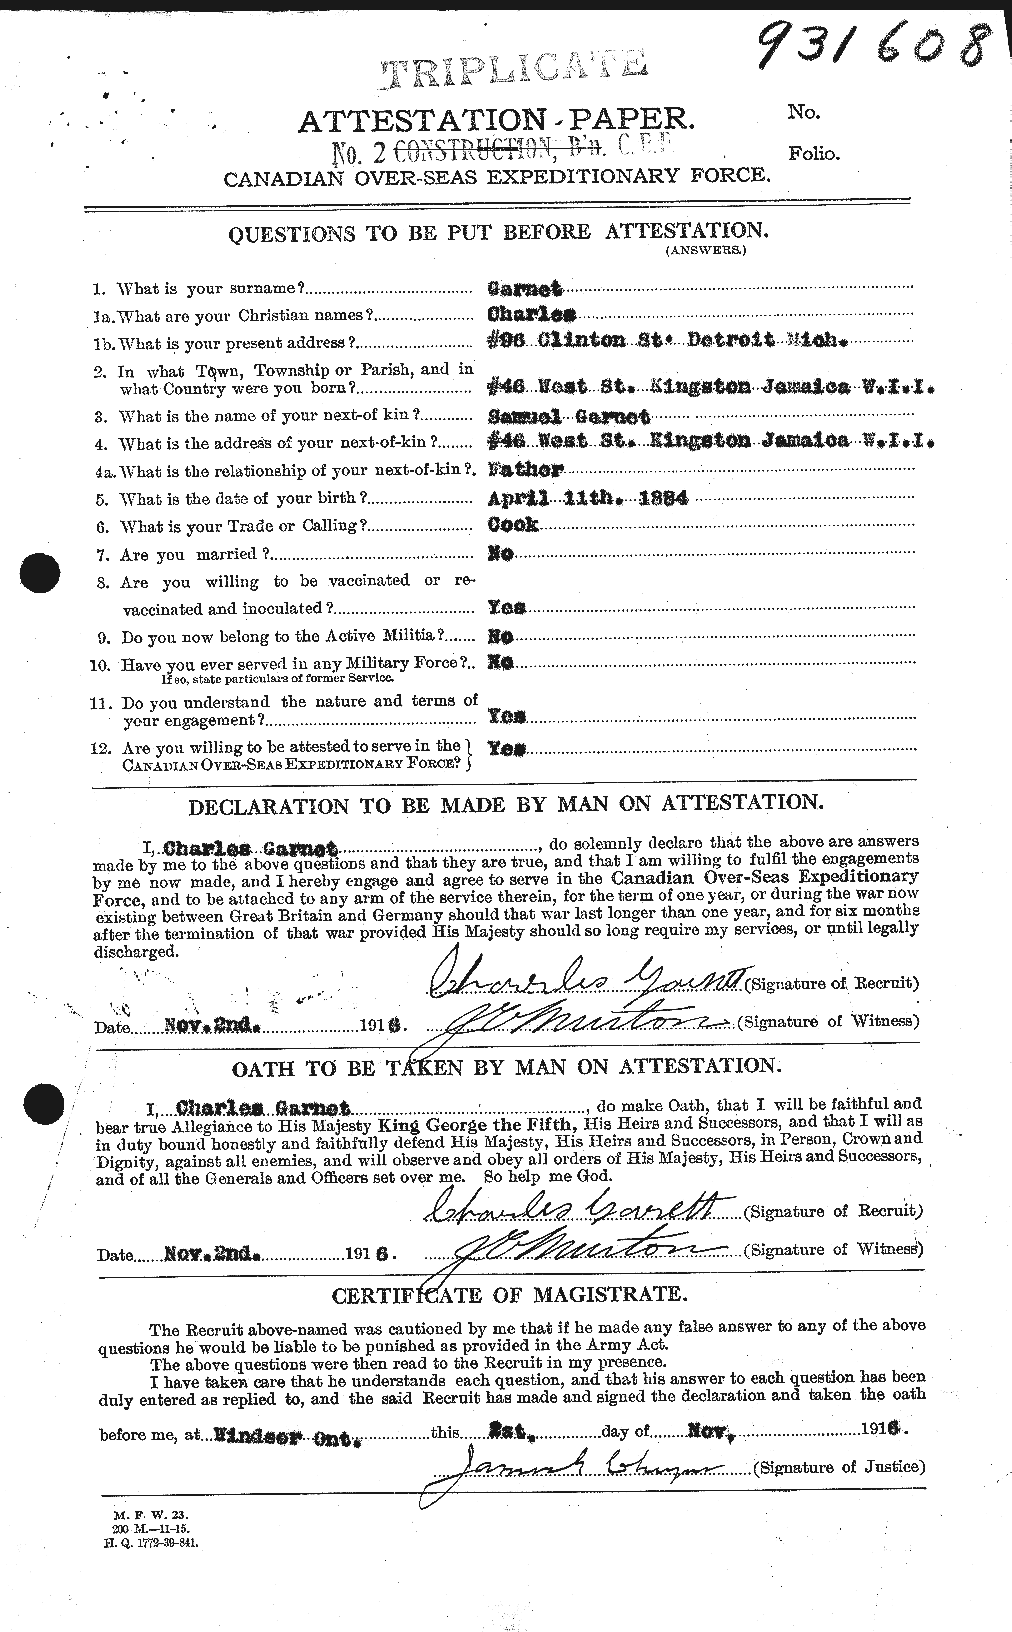 Personnel Records of the First World War - CEF 341907a